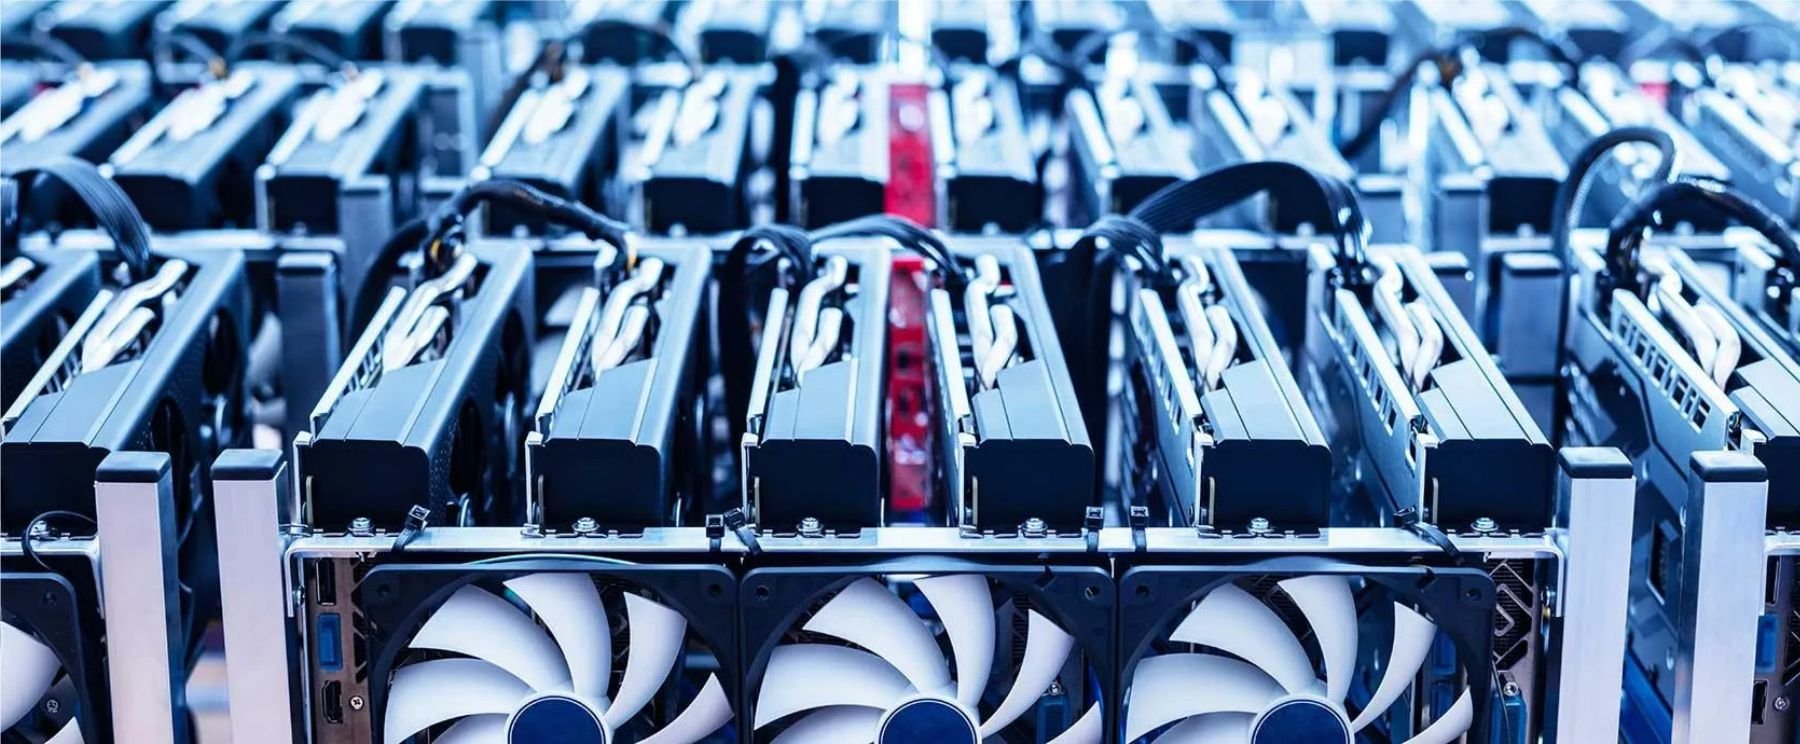 Cryptocurrency rigs standing close to each other